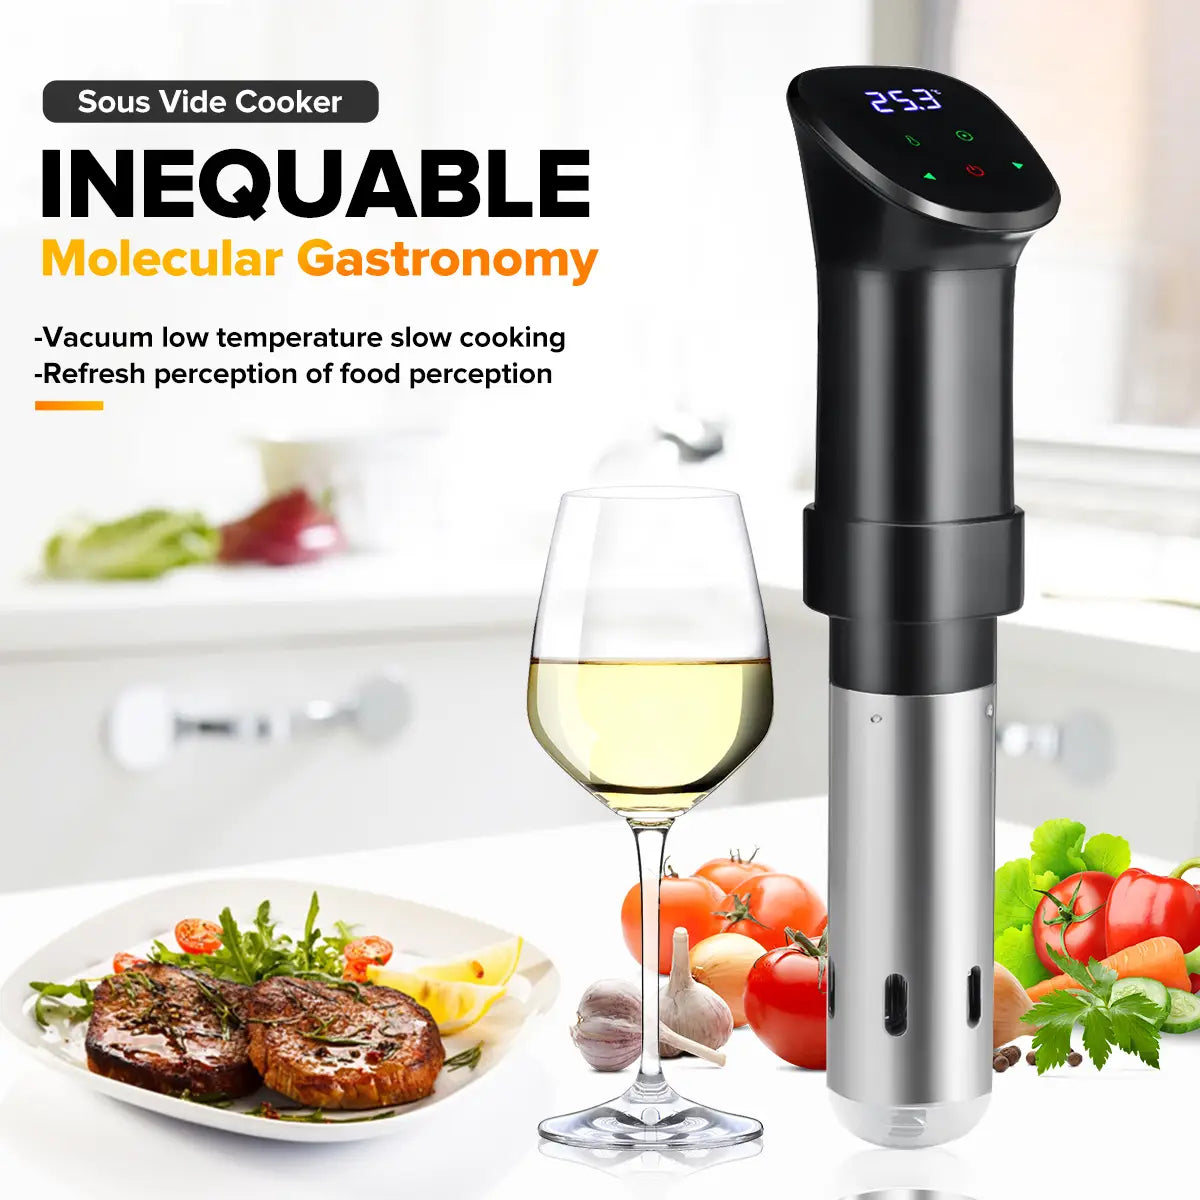 Augienb Sc-003 1600w Lcd Touch Sous Vide Cooker Waterproof